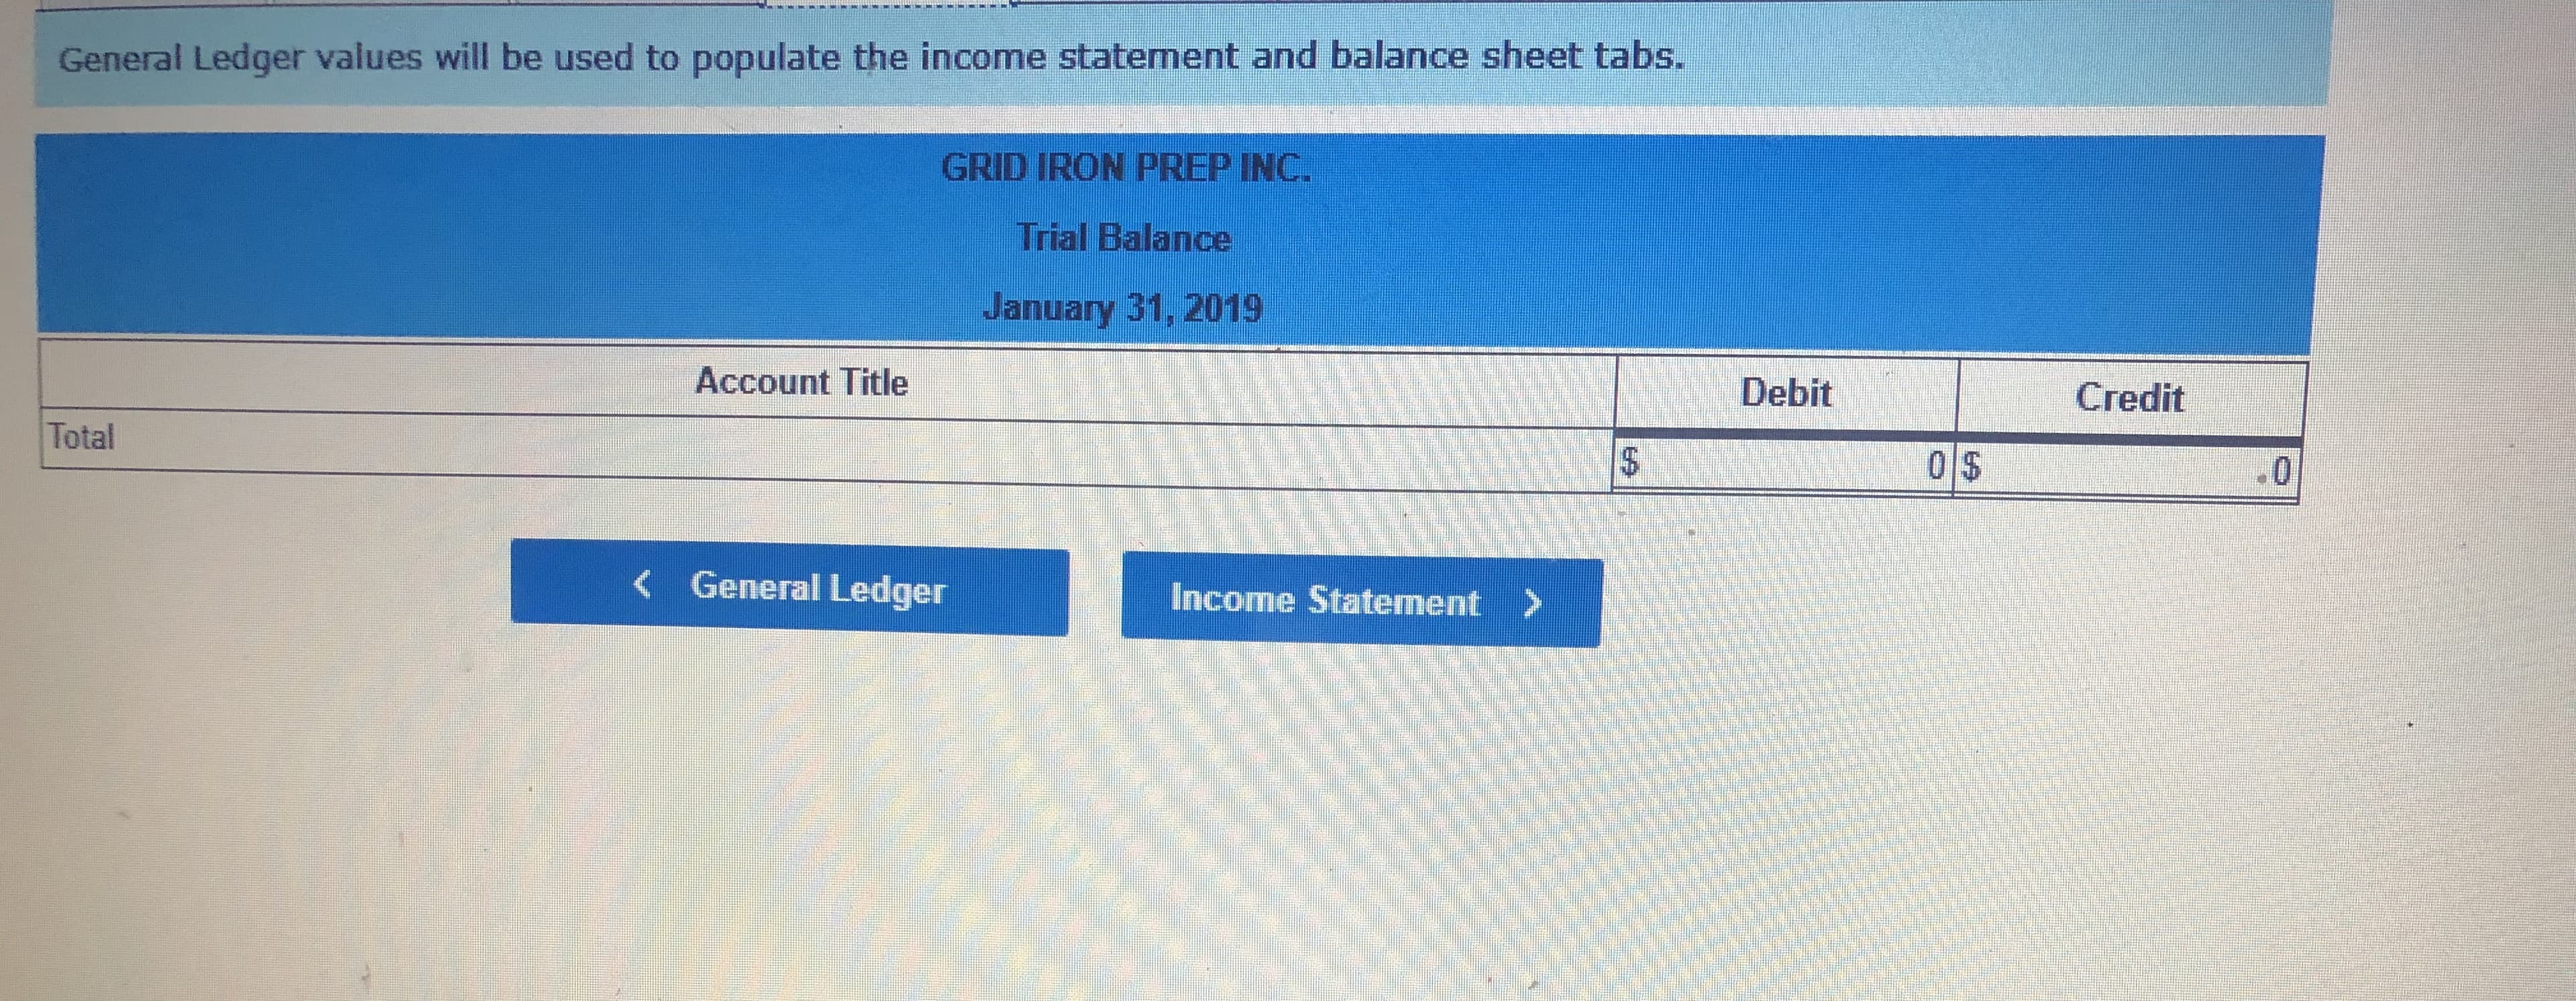 General Ledger values will be used to populate the income statement and balance sheet tabs.
GRID IRON PREP INC.
Trial Balance
January 31, 2019
Account Title
Debit
Credit
Total
0 $
0
General Ledger
Income Statement
EA
